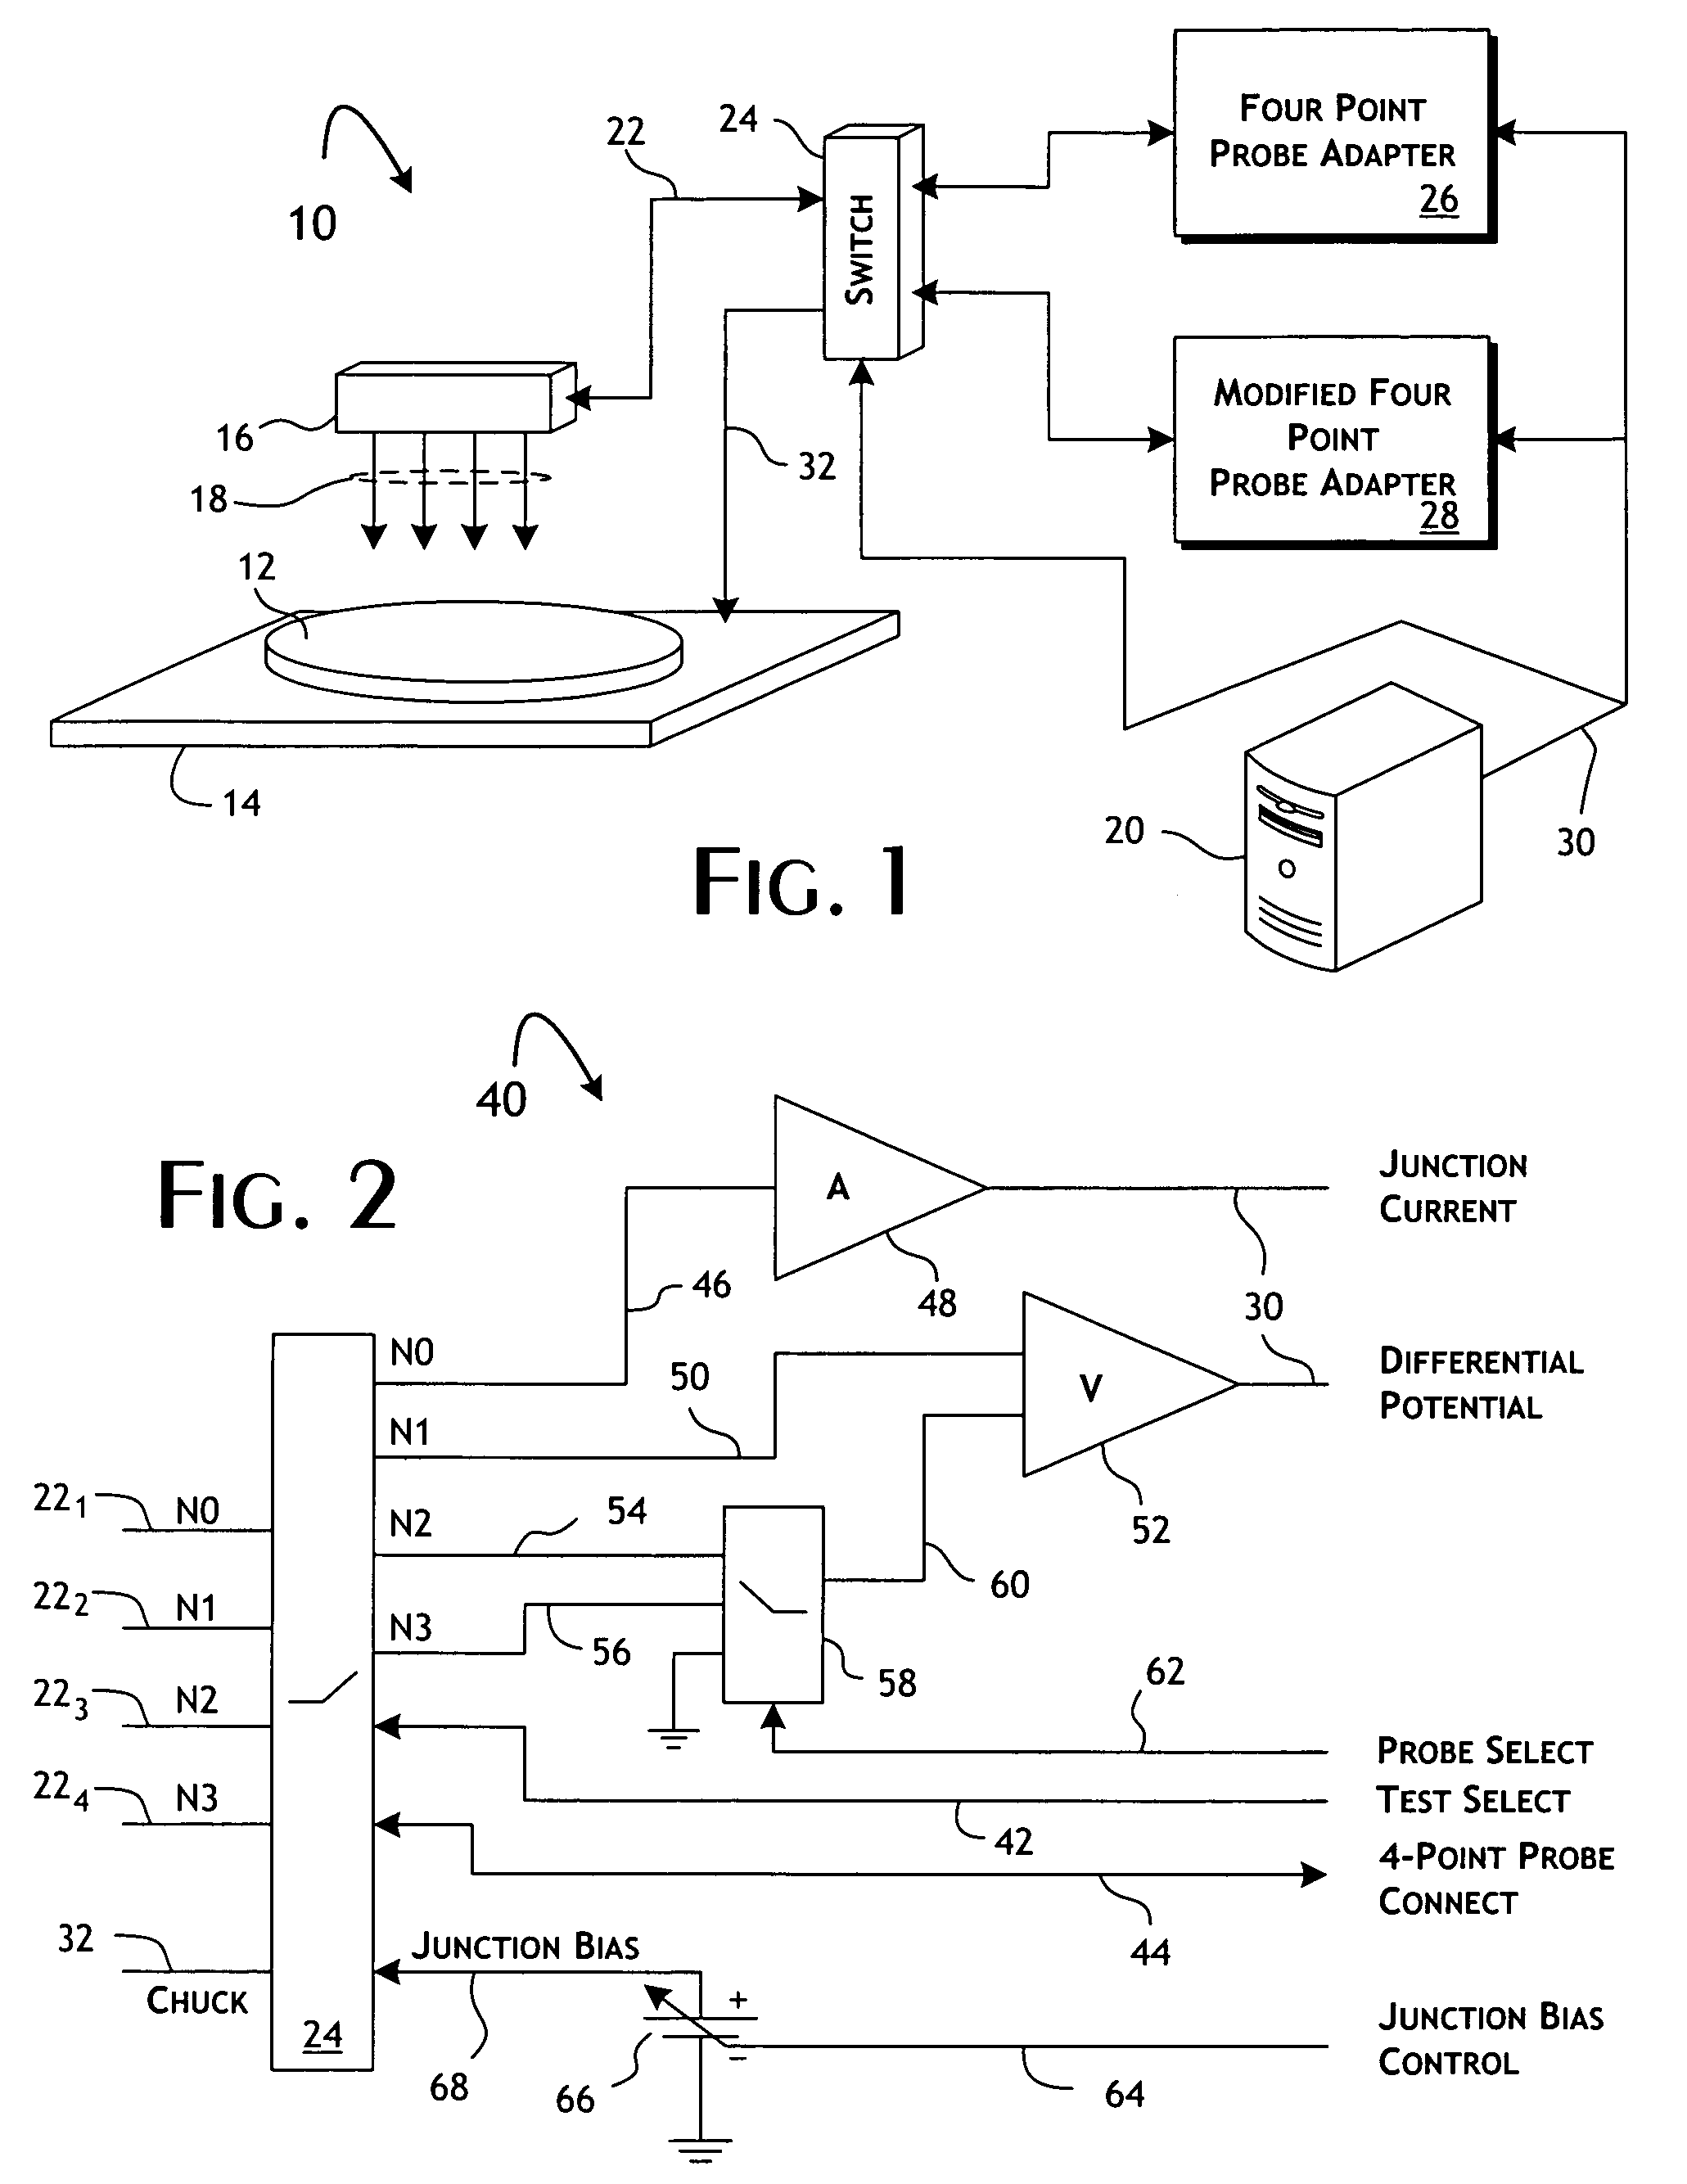 System and methods of measuring semiconductor sheet resistivity and junction leakage current